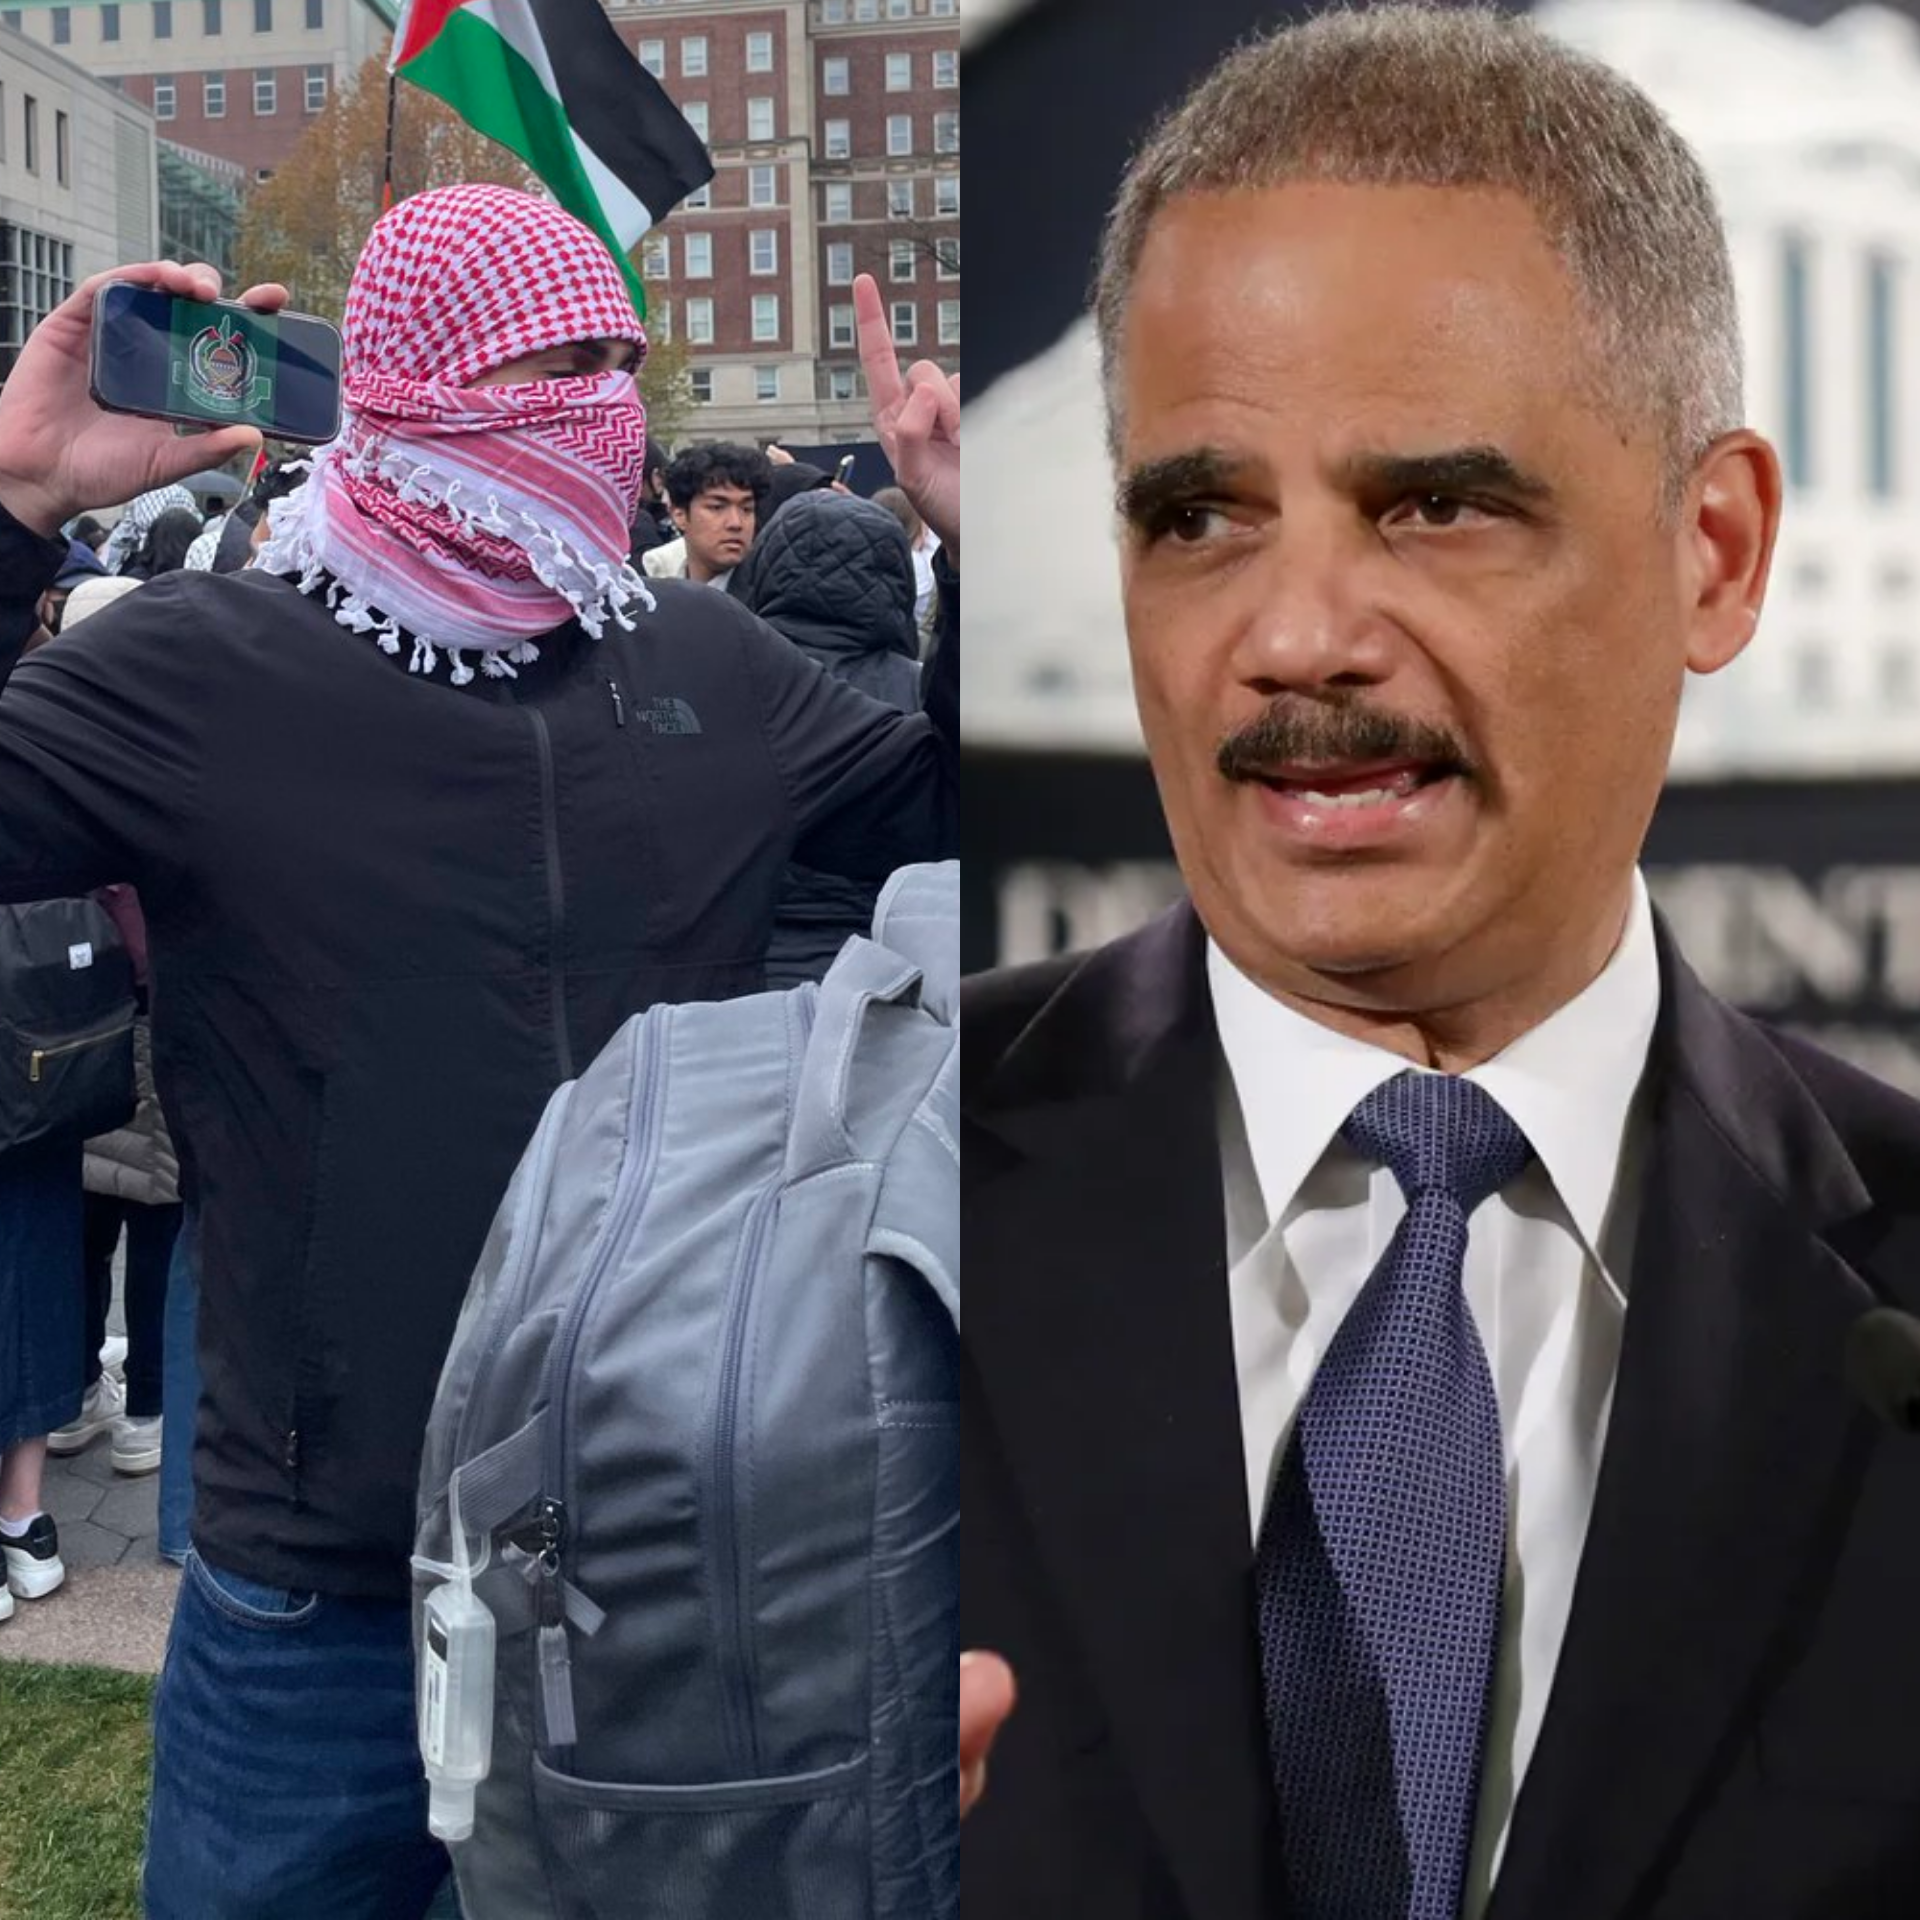 Eric Holder Says Columbia’s Campus Agitators Have 'Legitimate Concerns.' His Law Firm, Covington & Burling, Said Their Behavior ‘Would Not Be Tolerated.’